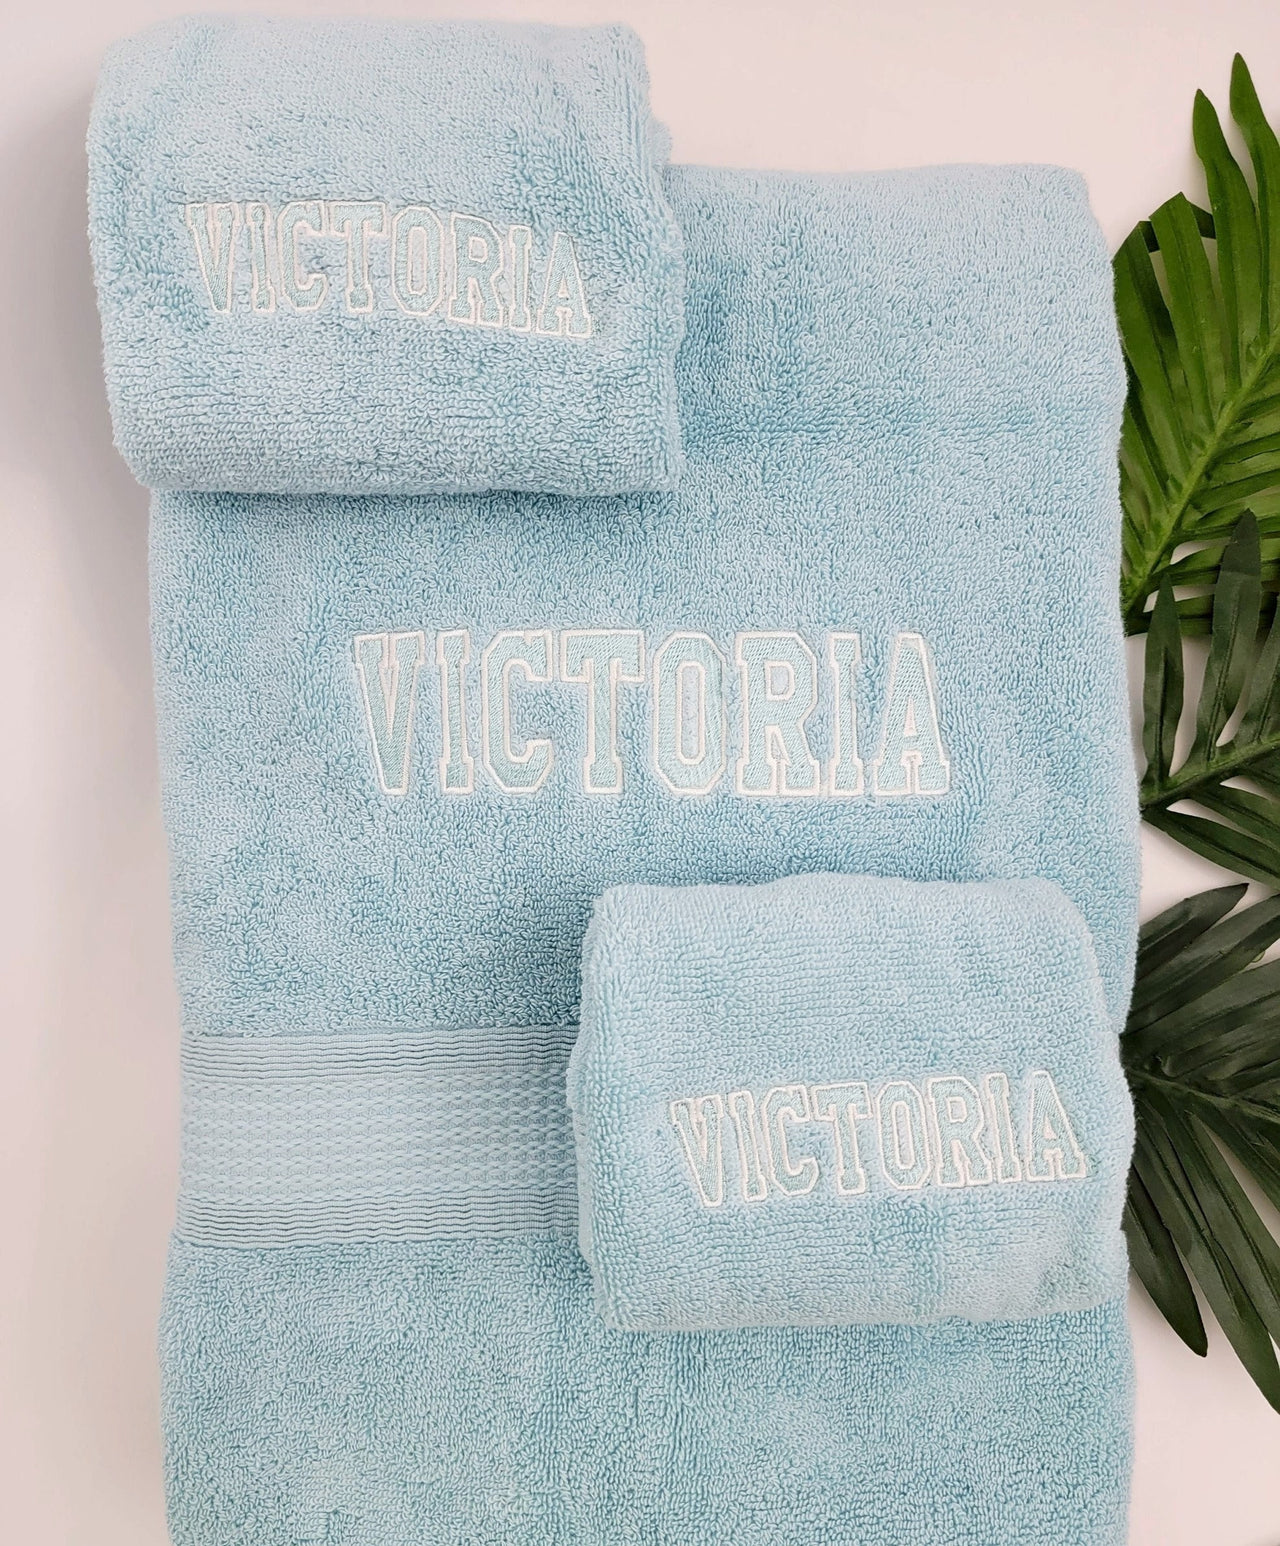 Monogrammed Bath Towel Set - Personalized Towels With Name - Set of Towels - Graduation Gift - Bachelorette Gift - Black Owned Shop